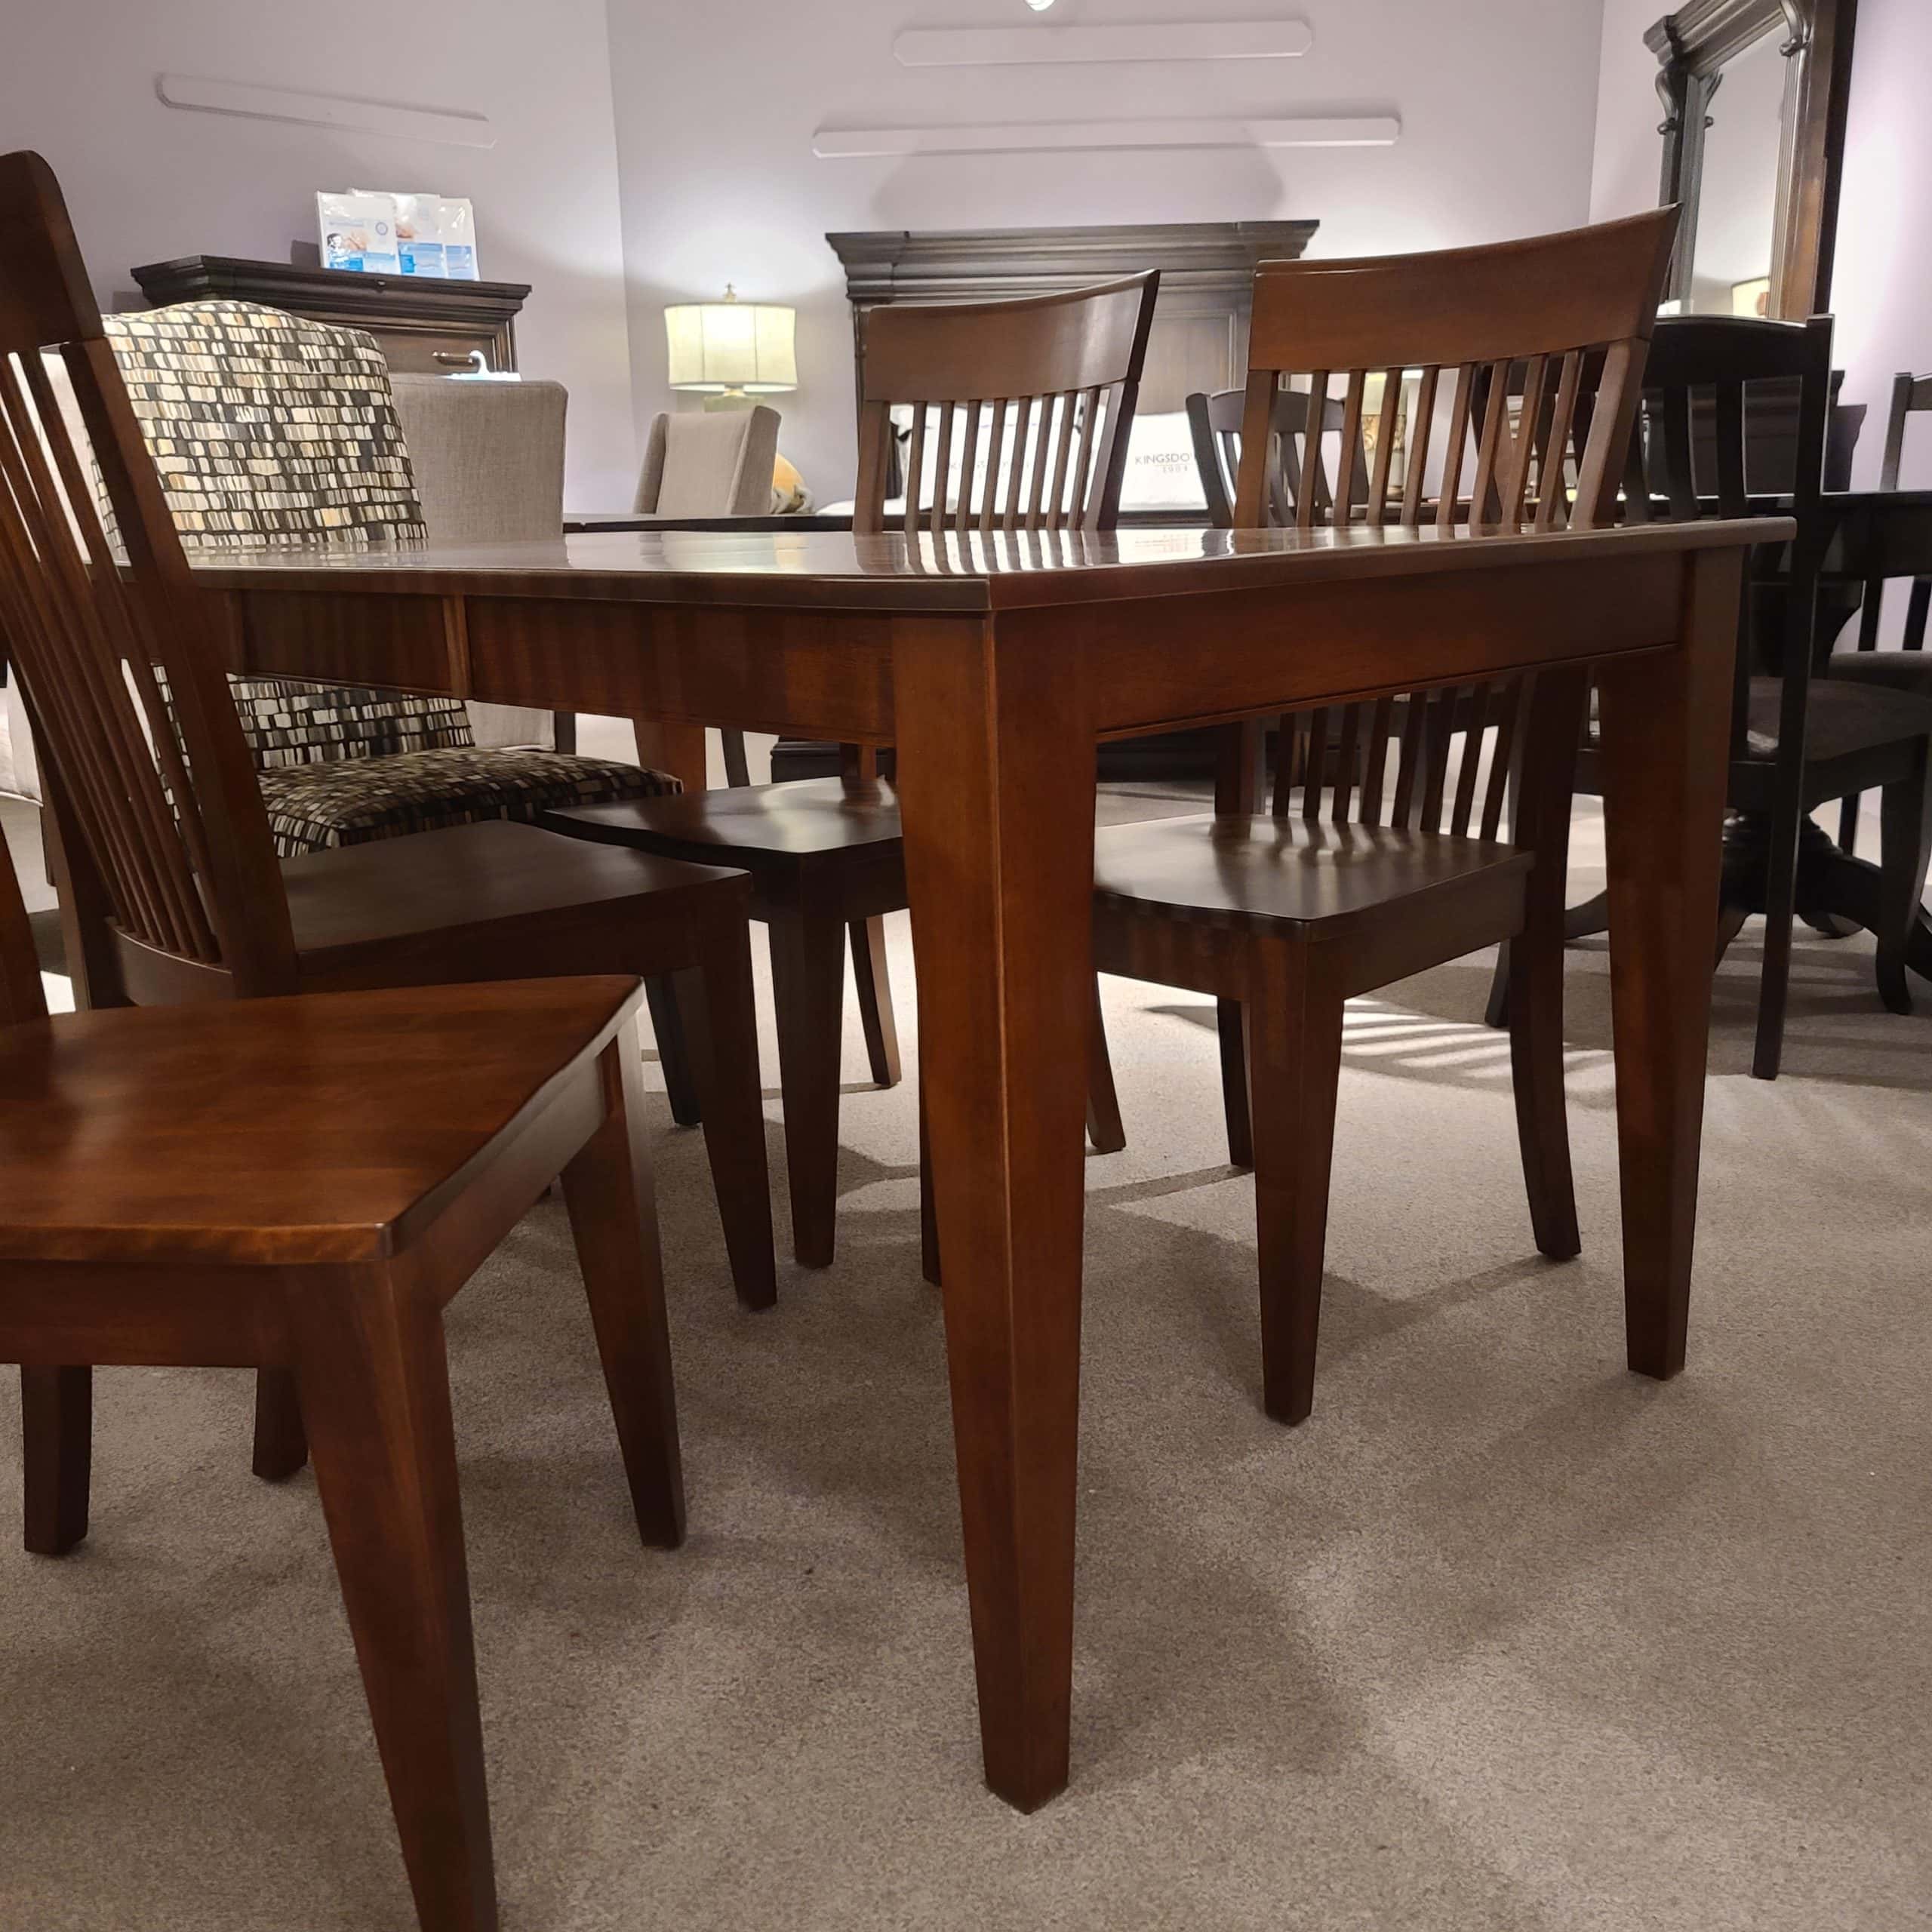 5-Piece Gourmet Solid Wood Dining Set